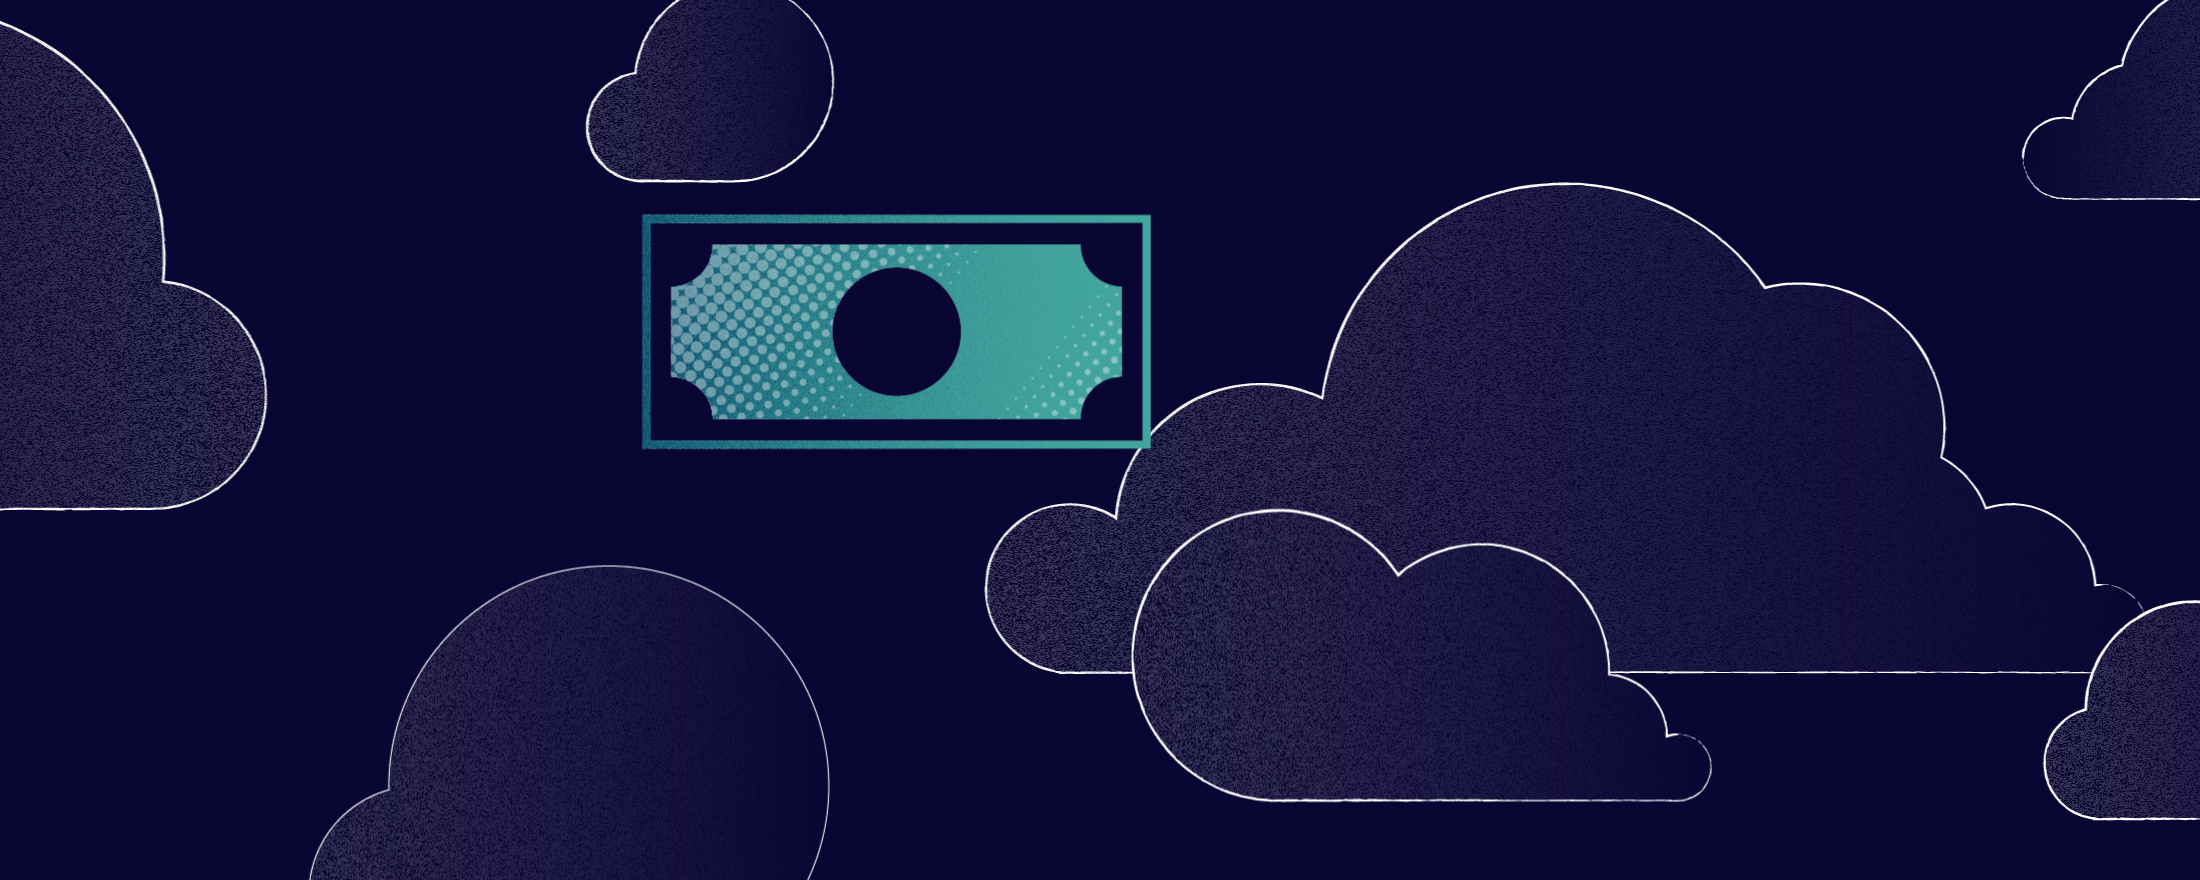 Illustration of money and clouds